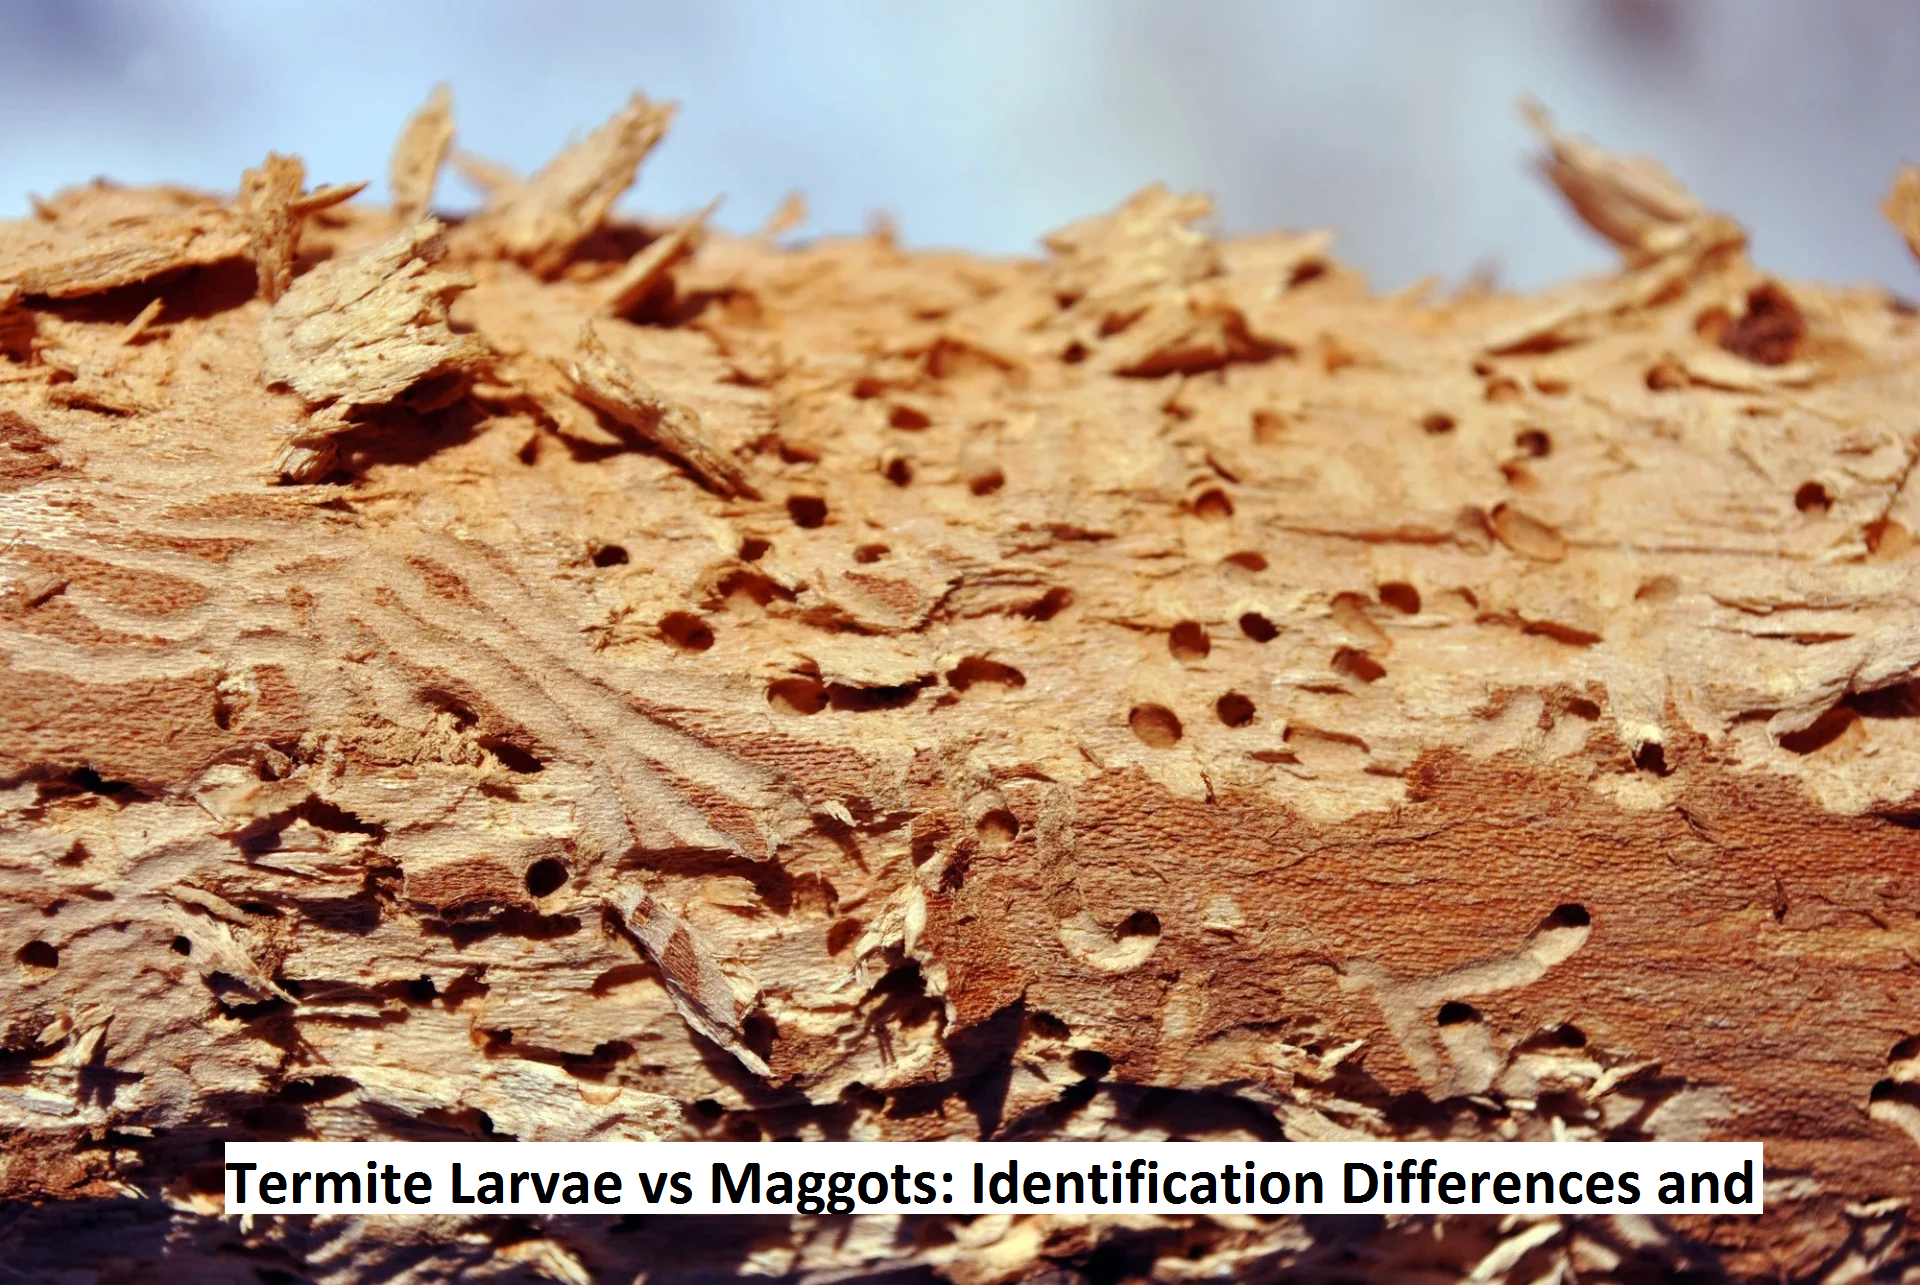 Termite Larvae vs Maggots: Identification Differences and Control